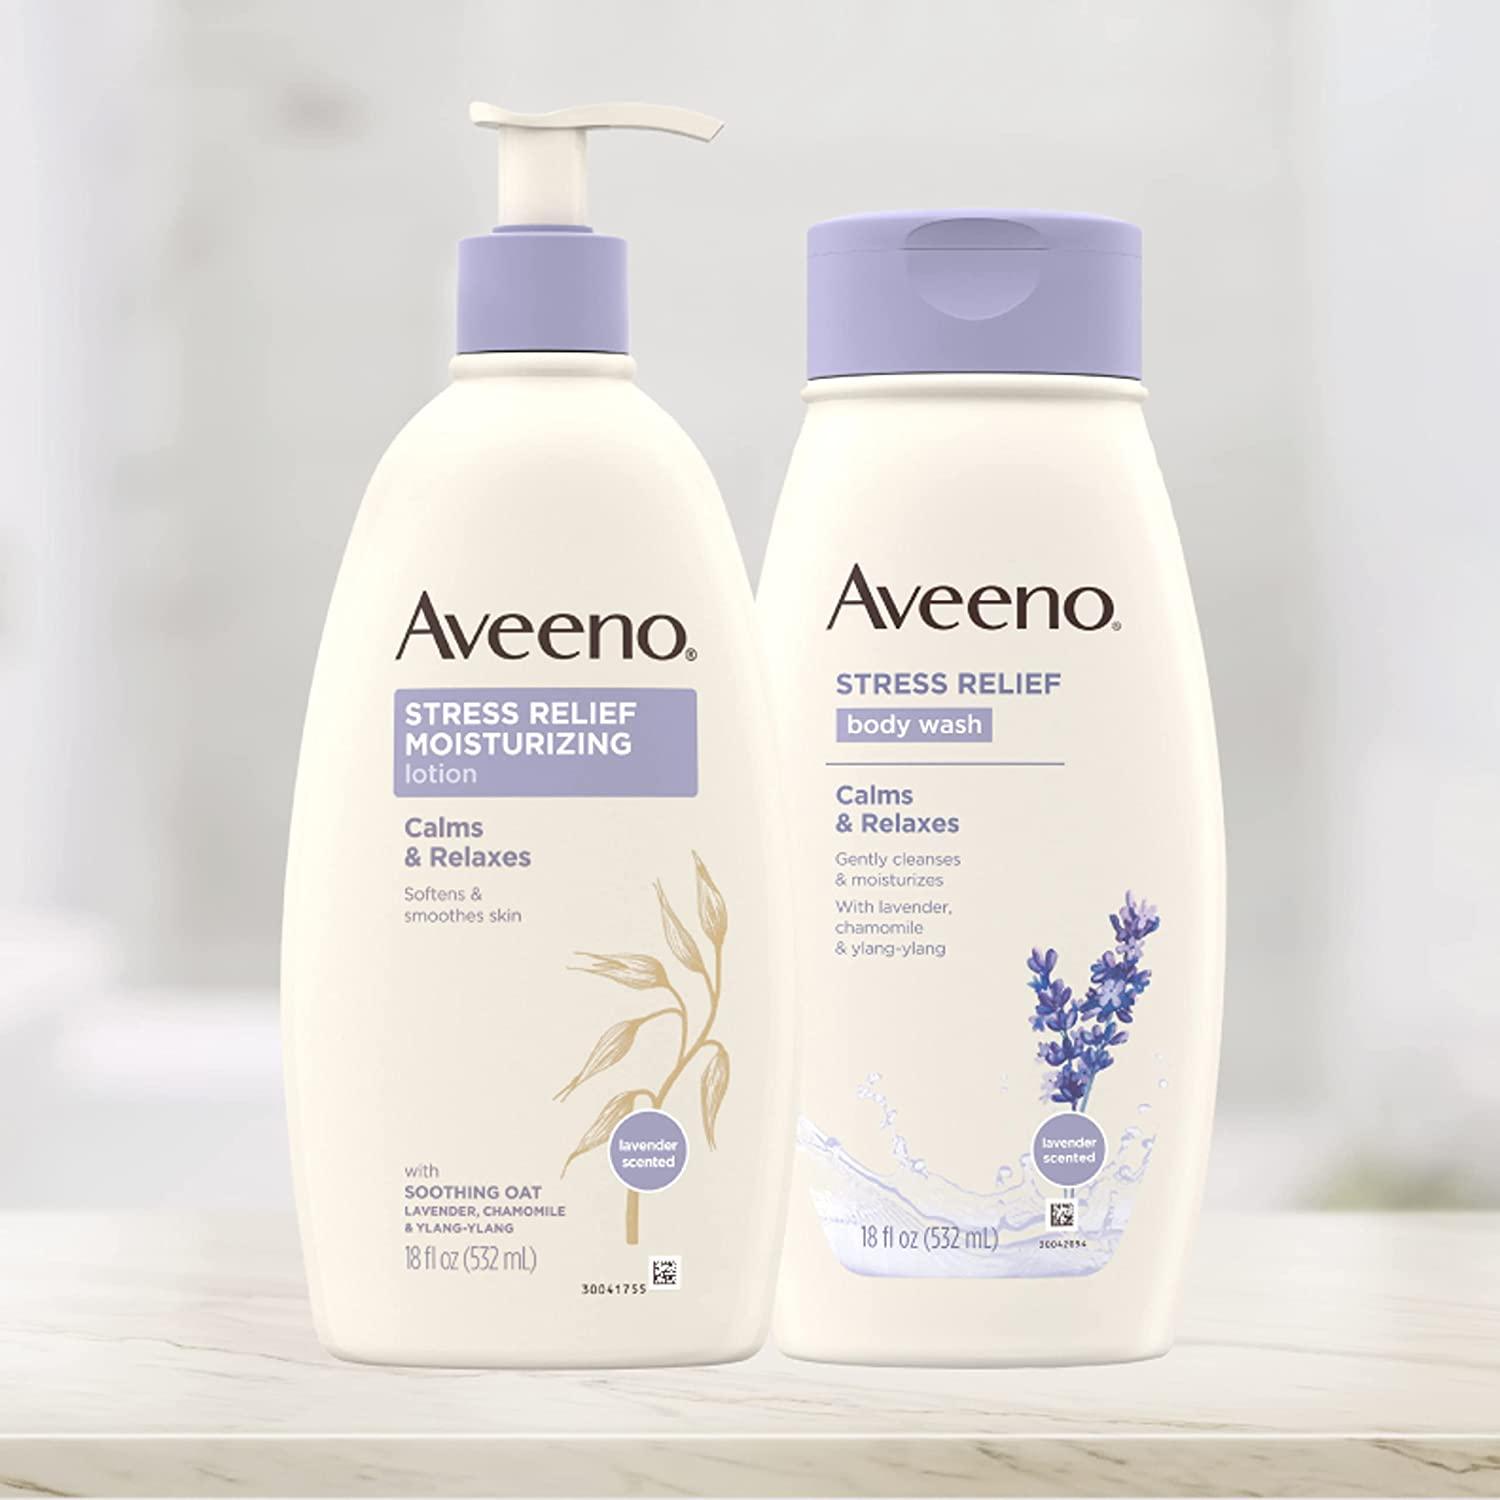 Aveeno Stress Relief Moisturizing Body and Hand Lotion with